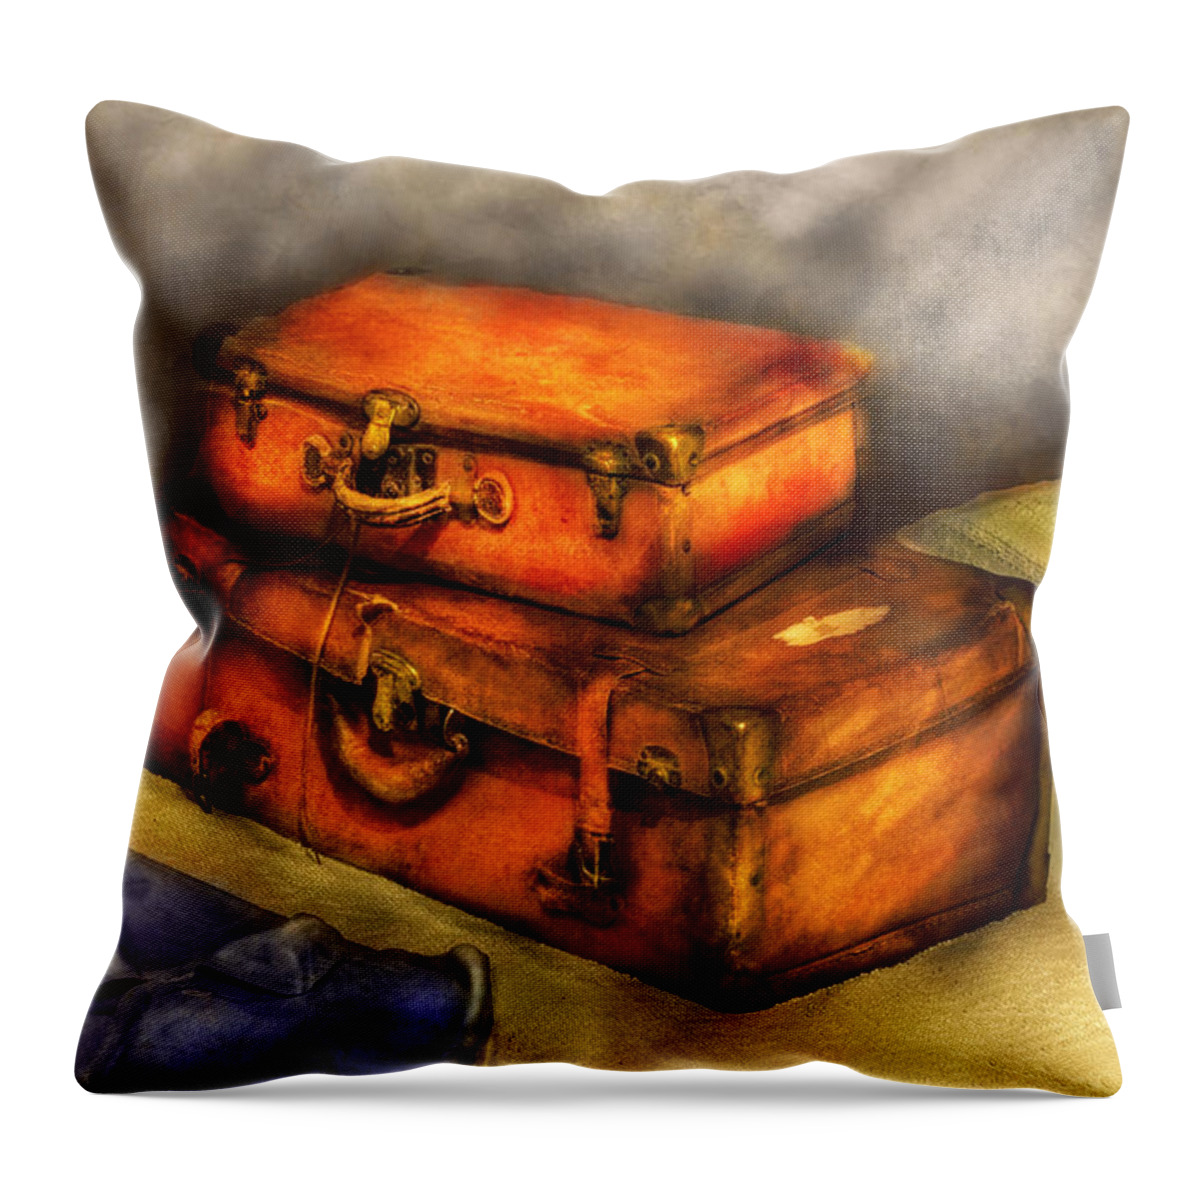 Savad Throw Pillow featuring the photograph Business Man - Packed Suitcases by Mike Savad